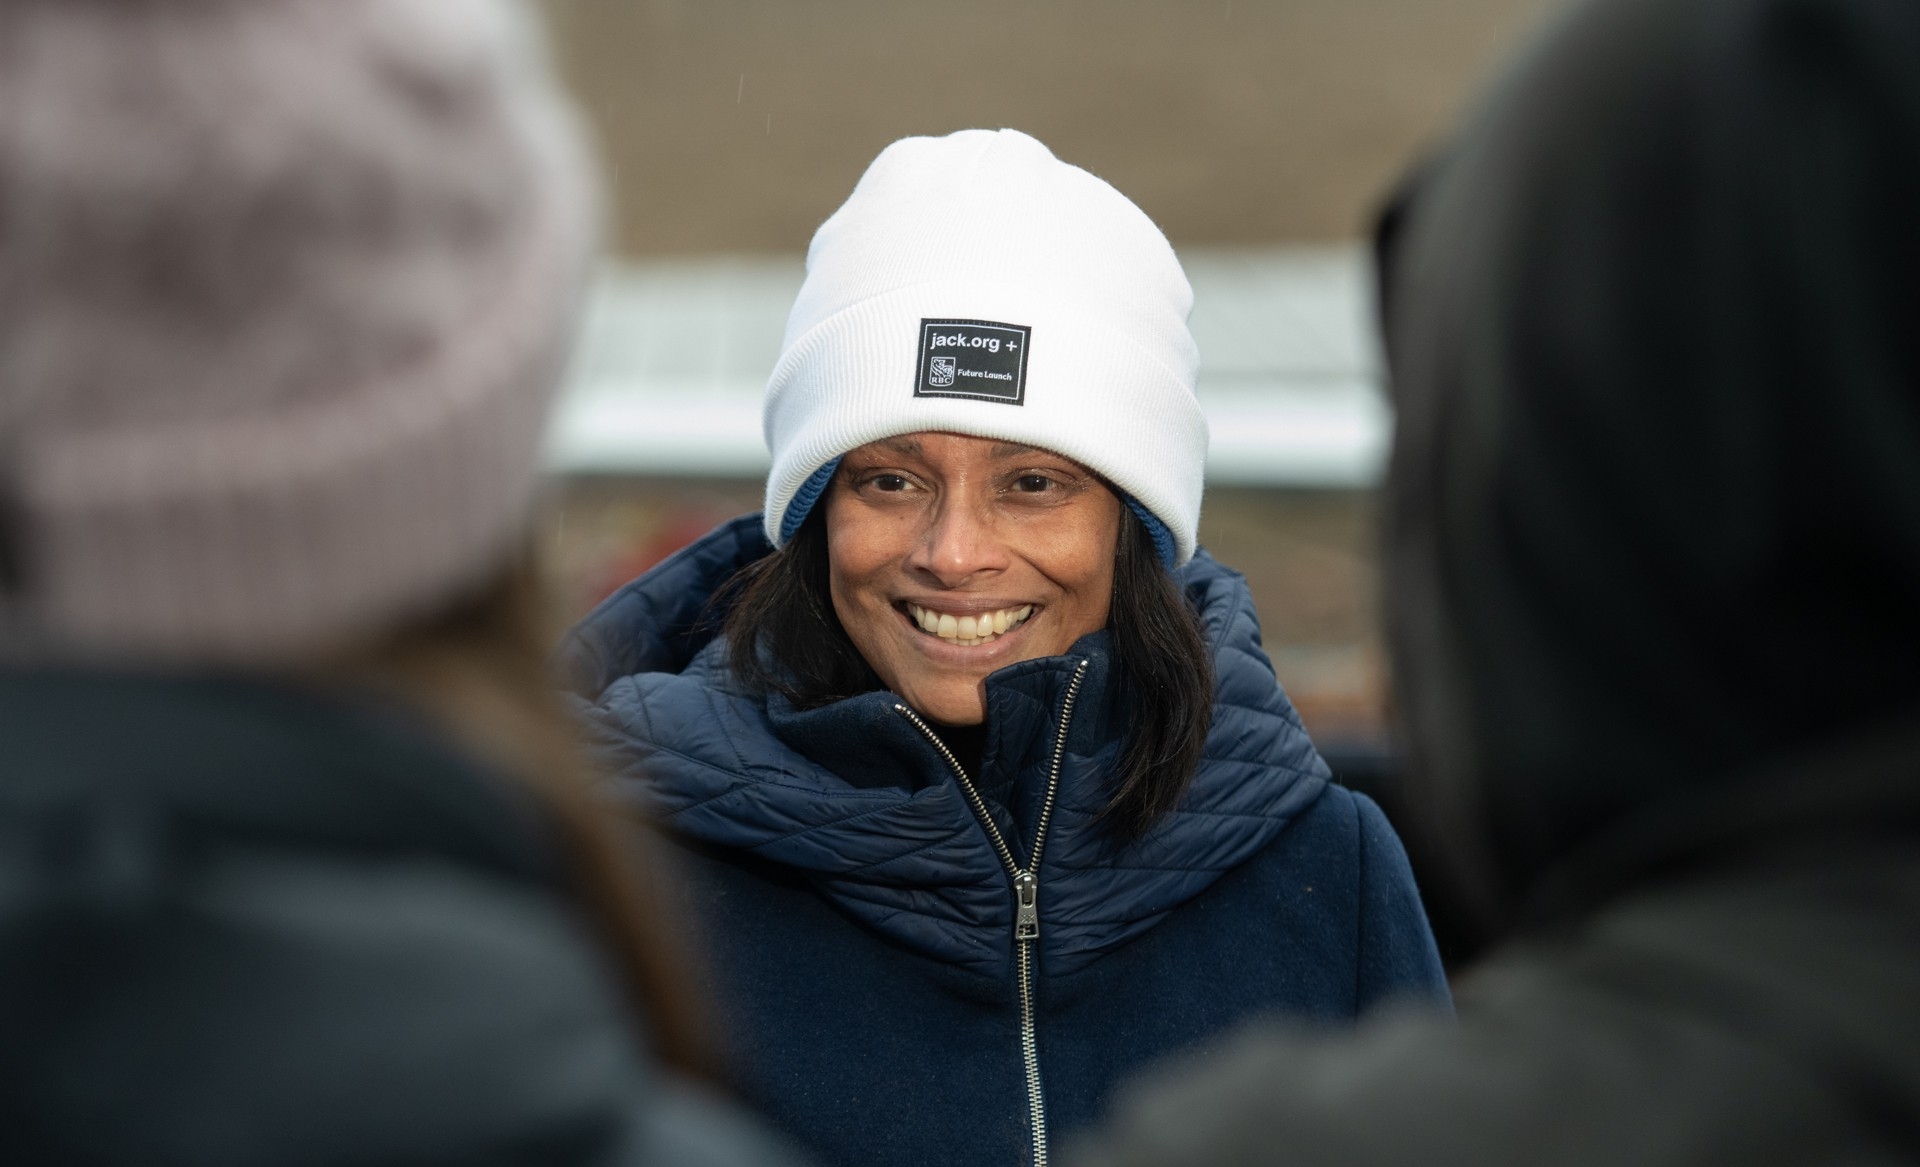 A woman is standing outdoors, smiling. She has black hair and is wearing a white tuque and navy blue winter jacket.